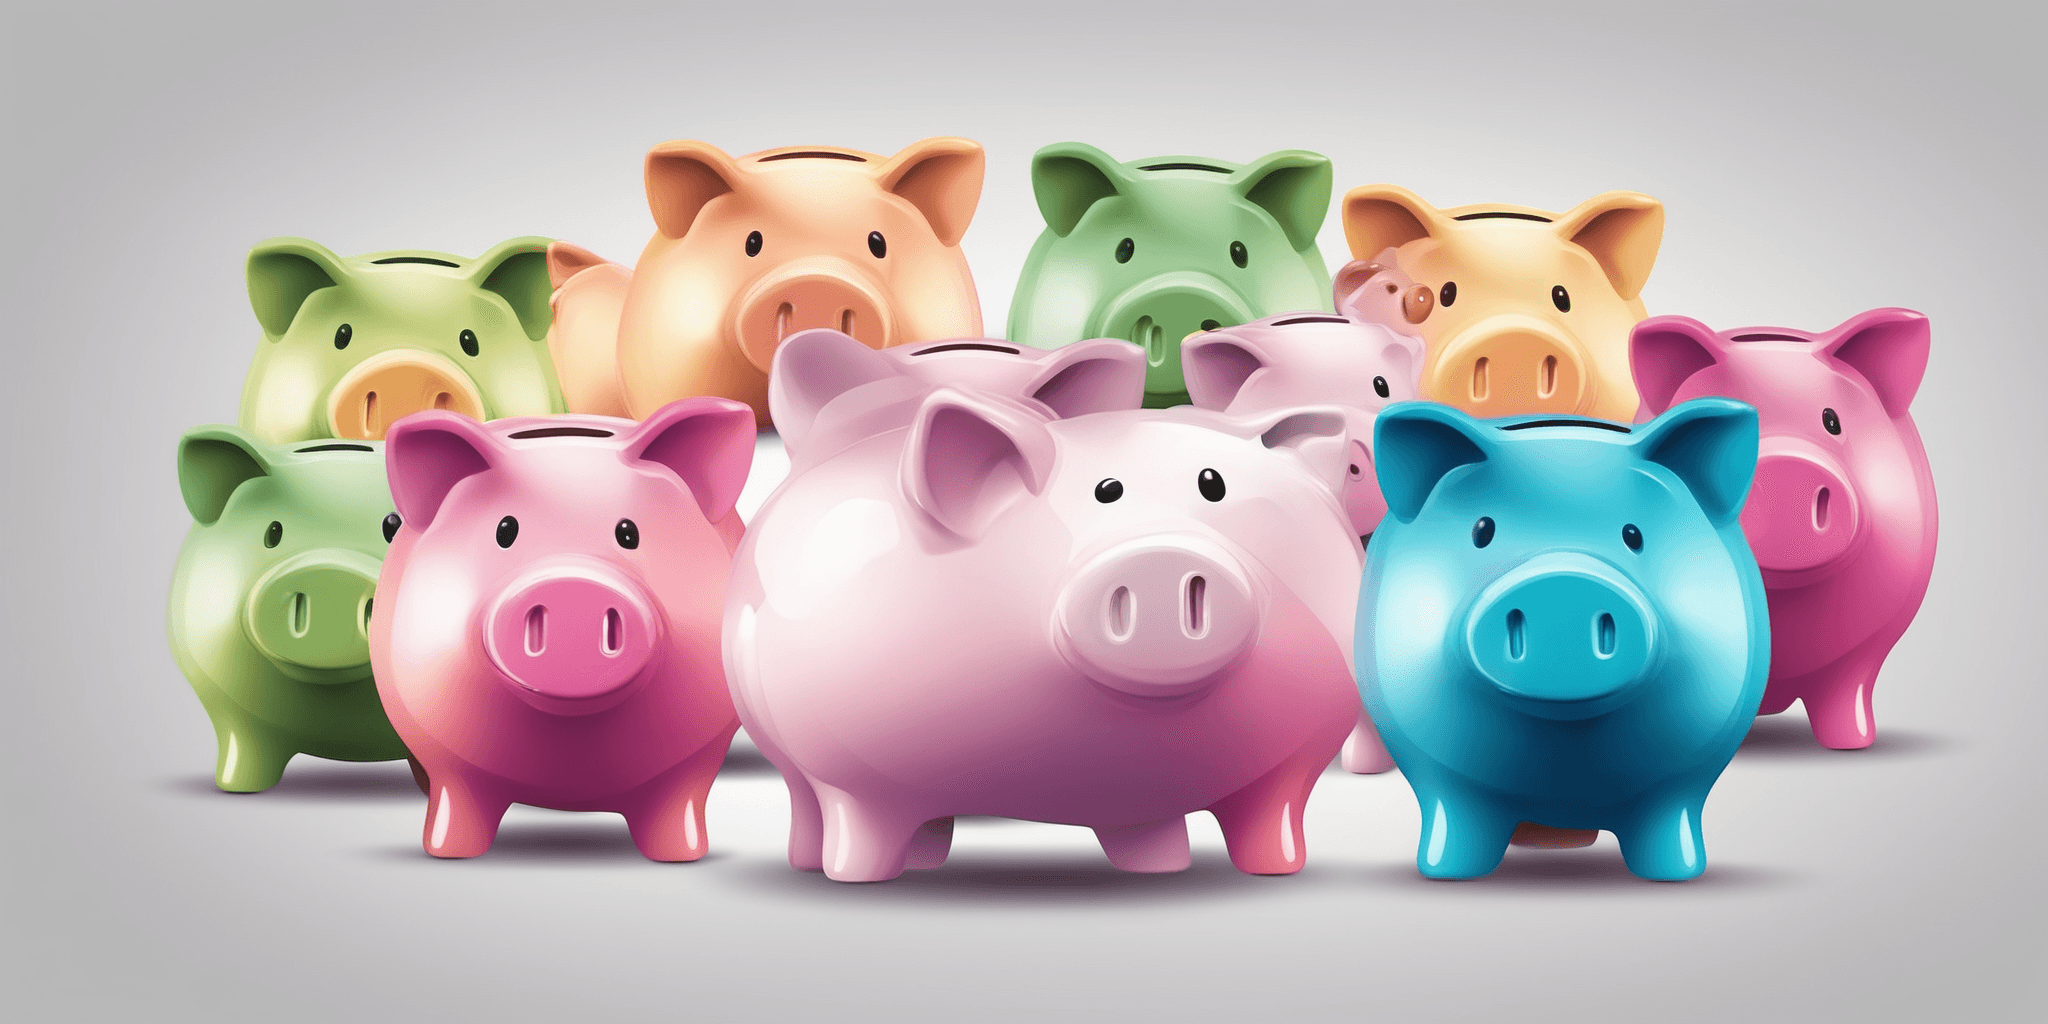 Piggy bank in illustration style with gradients and white background